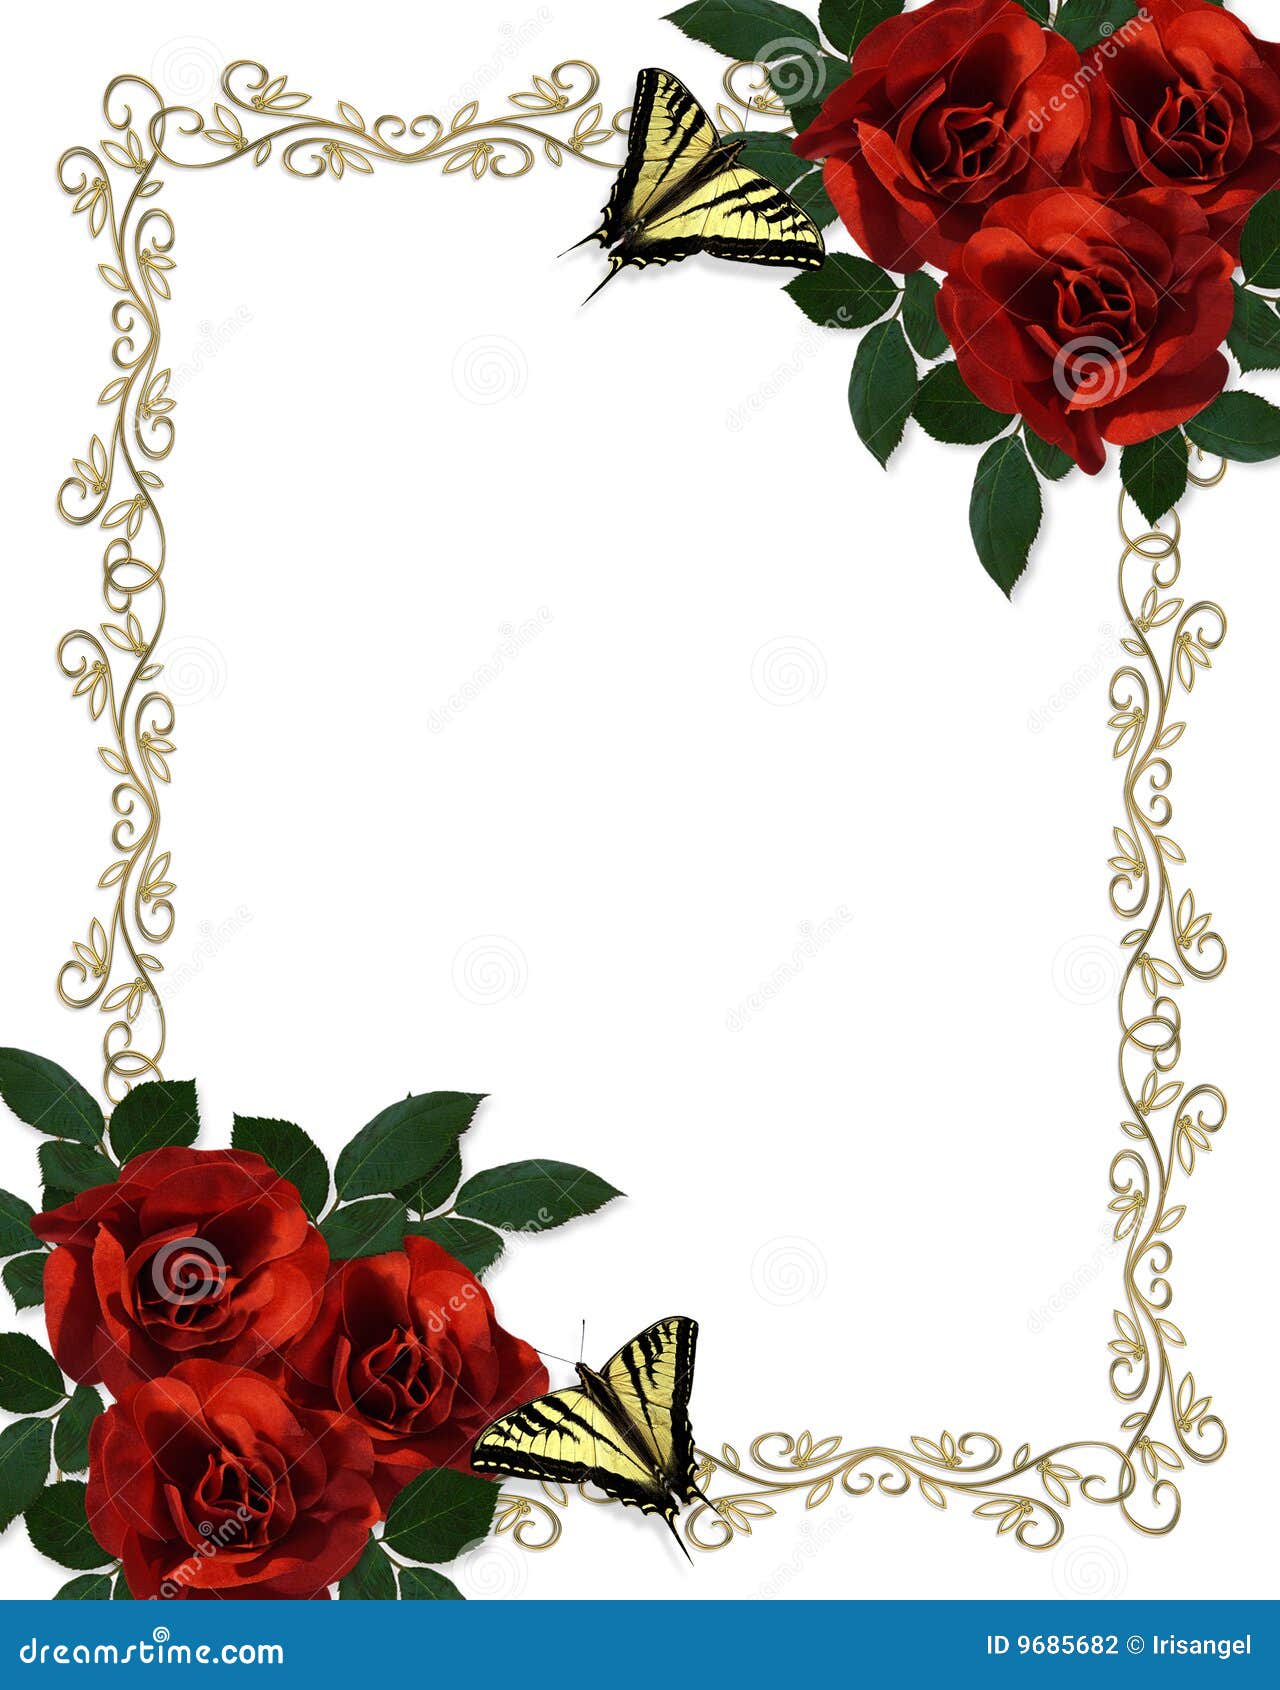 Wedding car decoration of flowers with roses and butterflies Stock